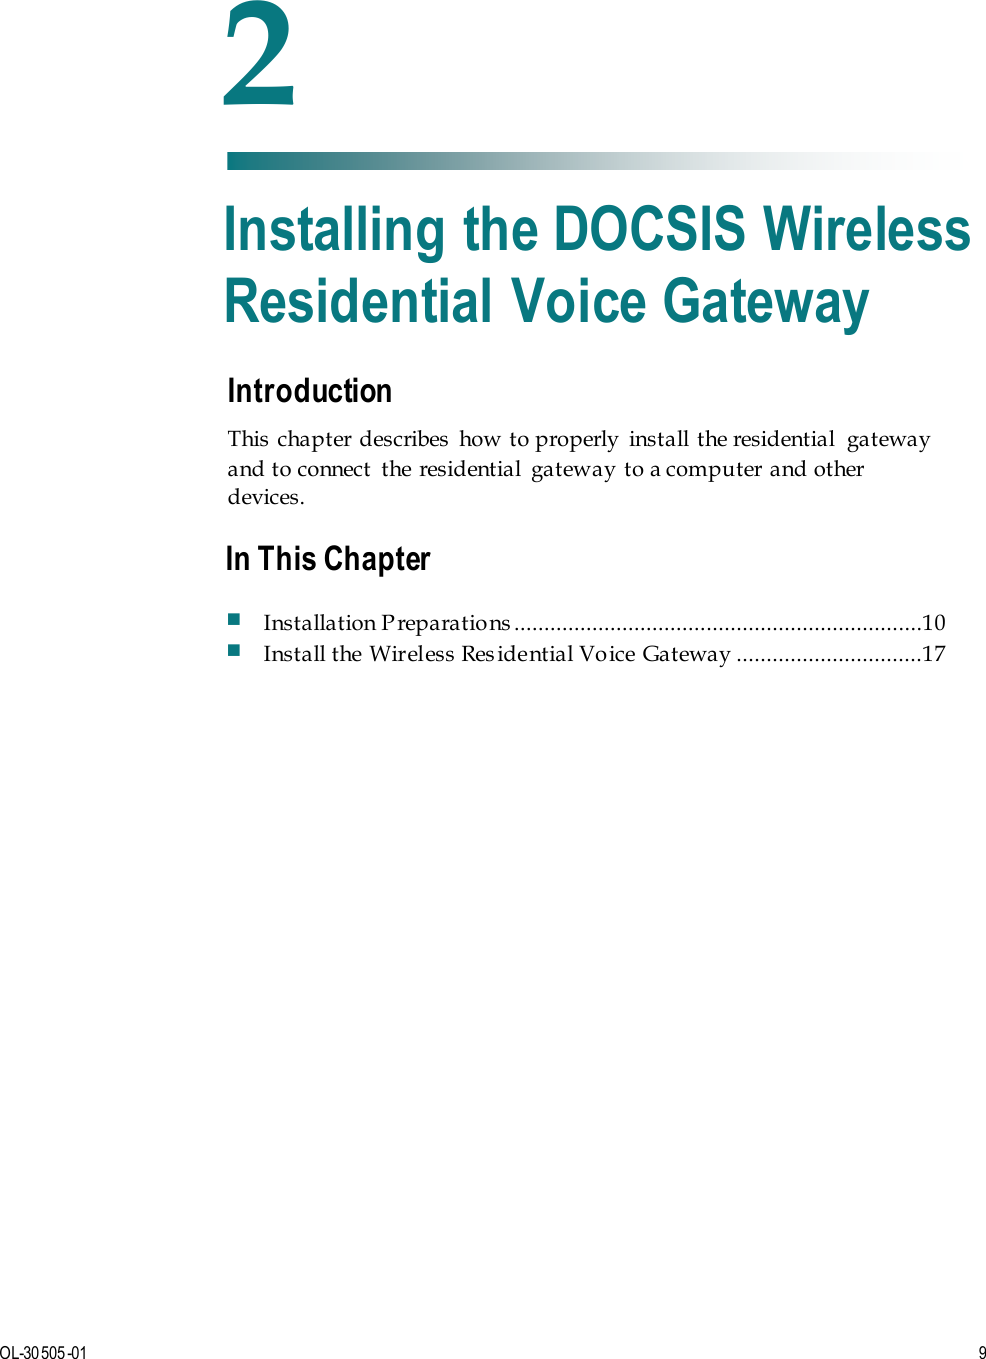   OL-30505-01  9  Introduction This  chapter  describes  how to properly  install the residential  gateway and to connect  the residential  gateway to a computer and other devices.    2 Chapter 2 Installing the DOCSIS Wireless Residential Voice Gateway In This Chapter  Installation P reparations ....................................................................10  Install the Wireless Res idential Voice Gateway  ...............................17 